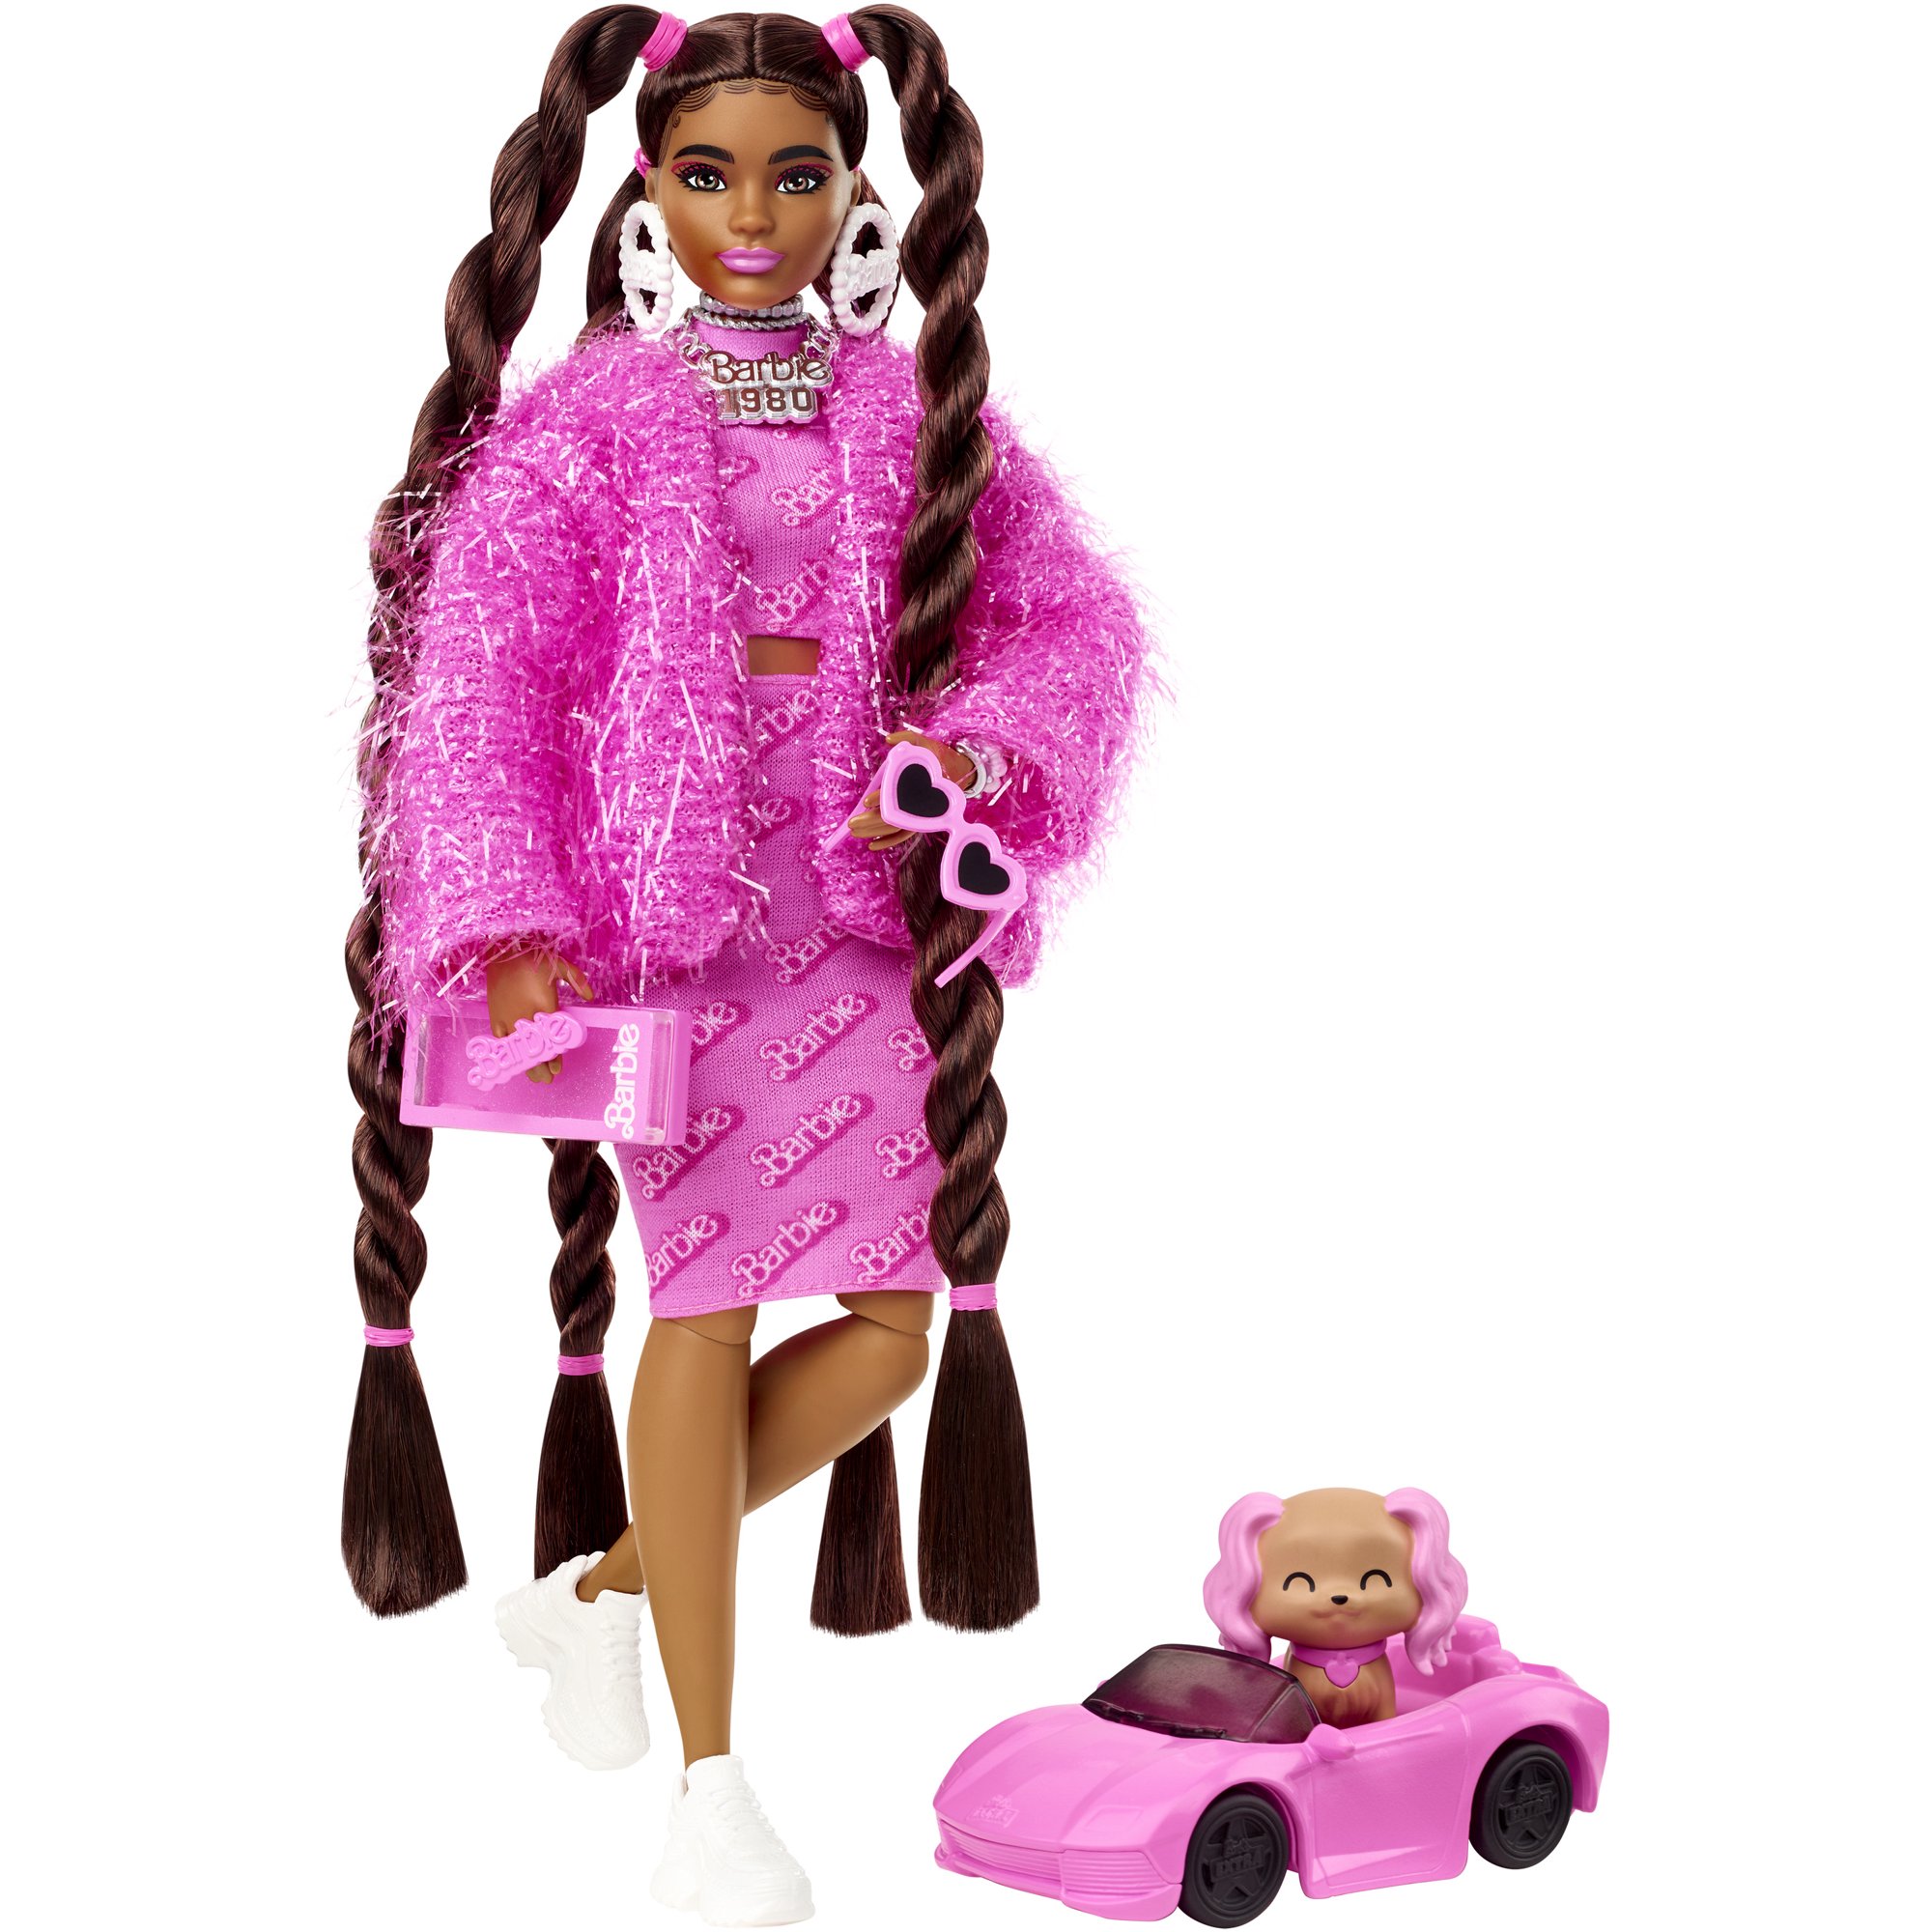 Barbie Extra Fashion Doll with Black Hair, Metallic Silver Jacket,  Accessories and Pet 